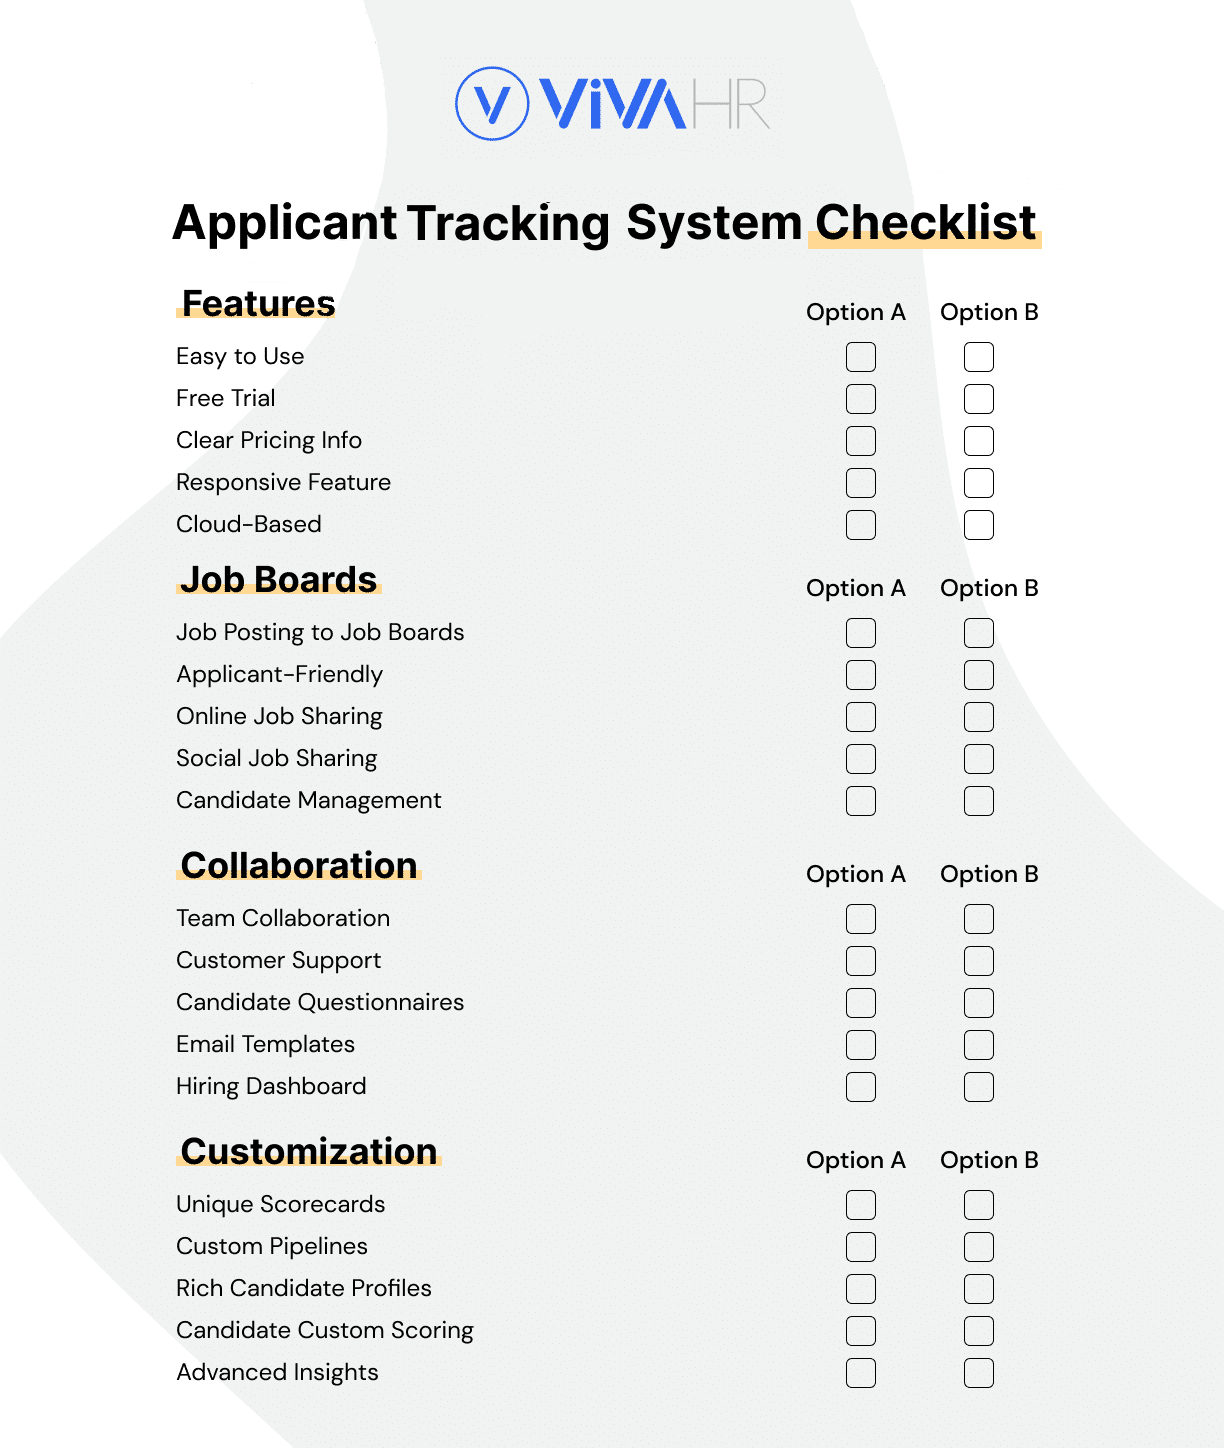 Applicant Tracking System Checklist